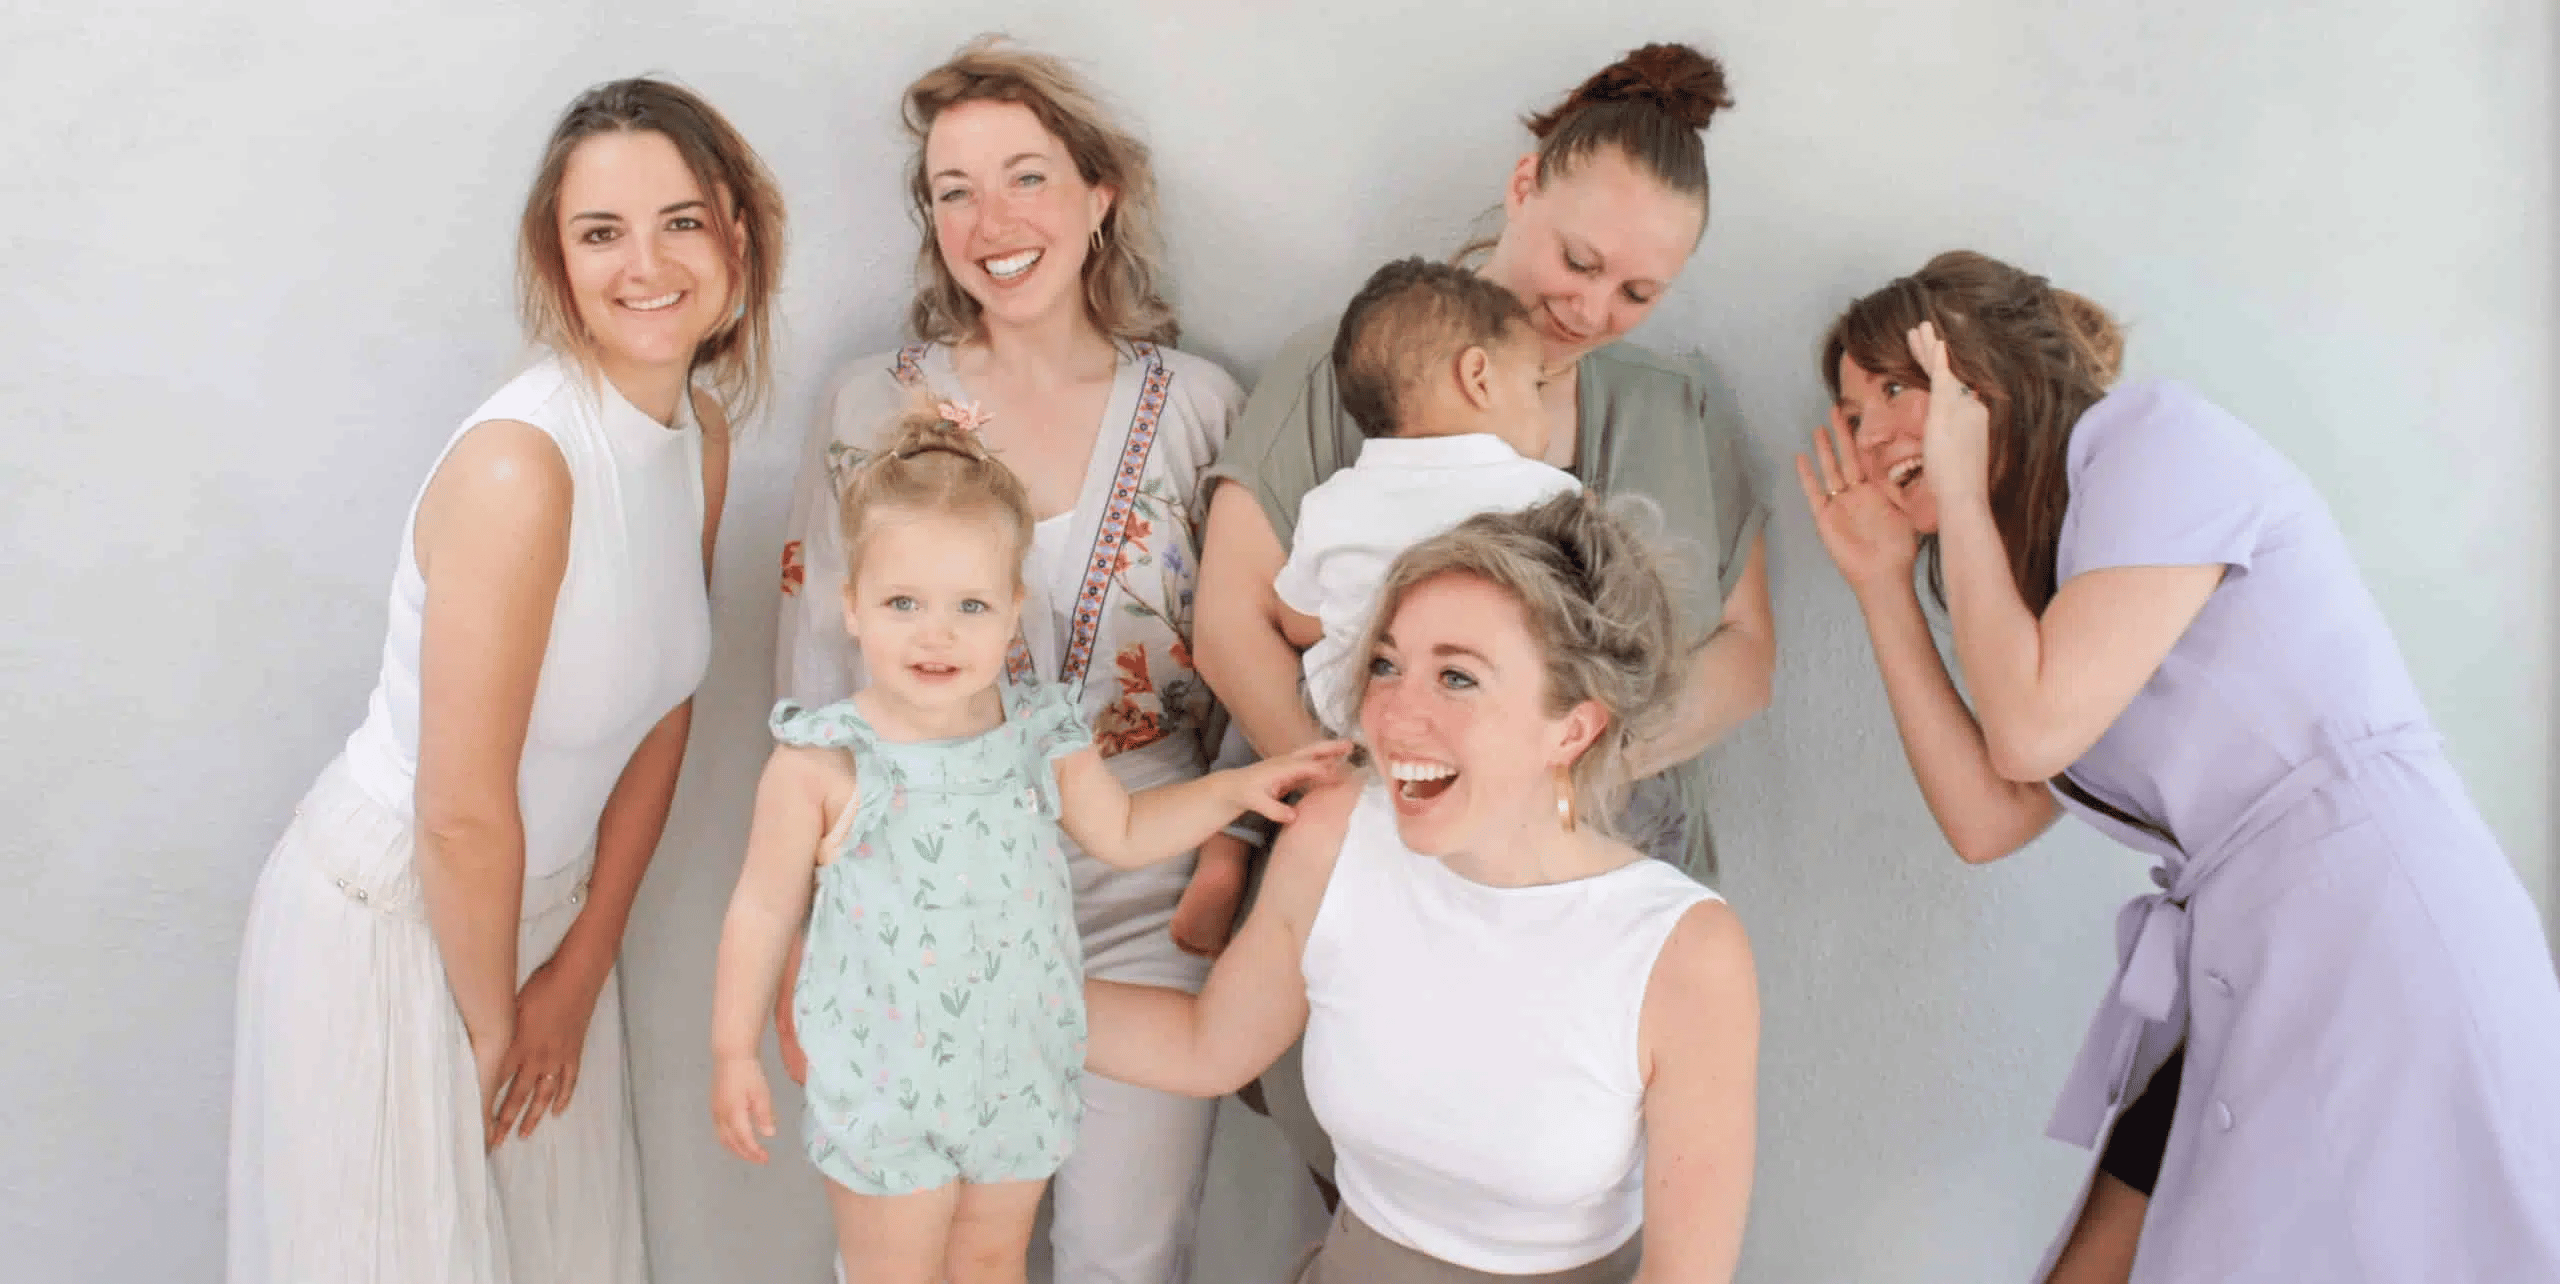 Nina.care babysitters and au pairs are pictured with babysitters on their arms and smiling into the camera